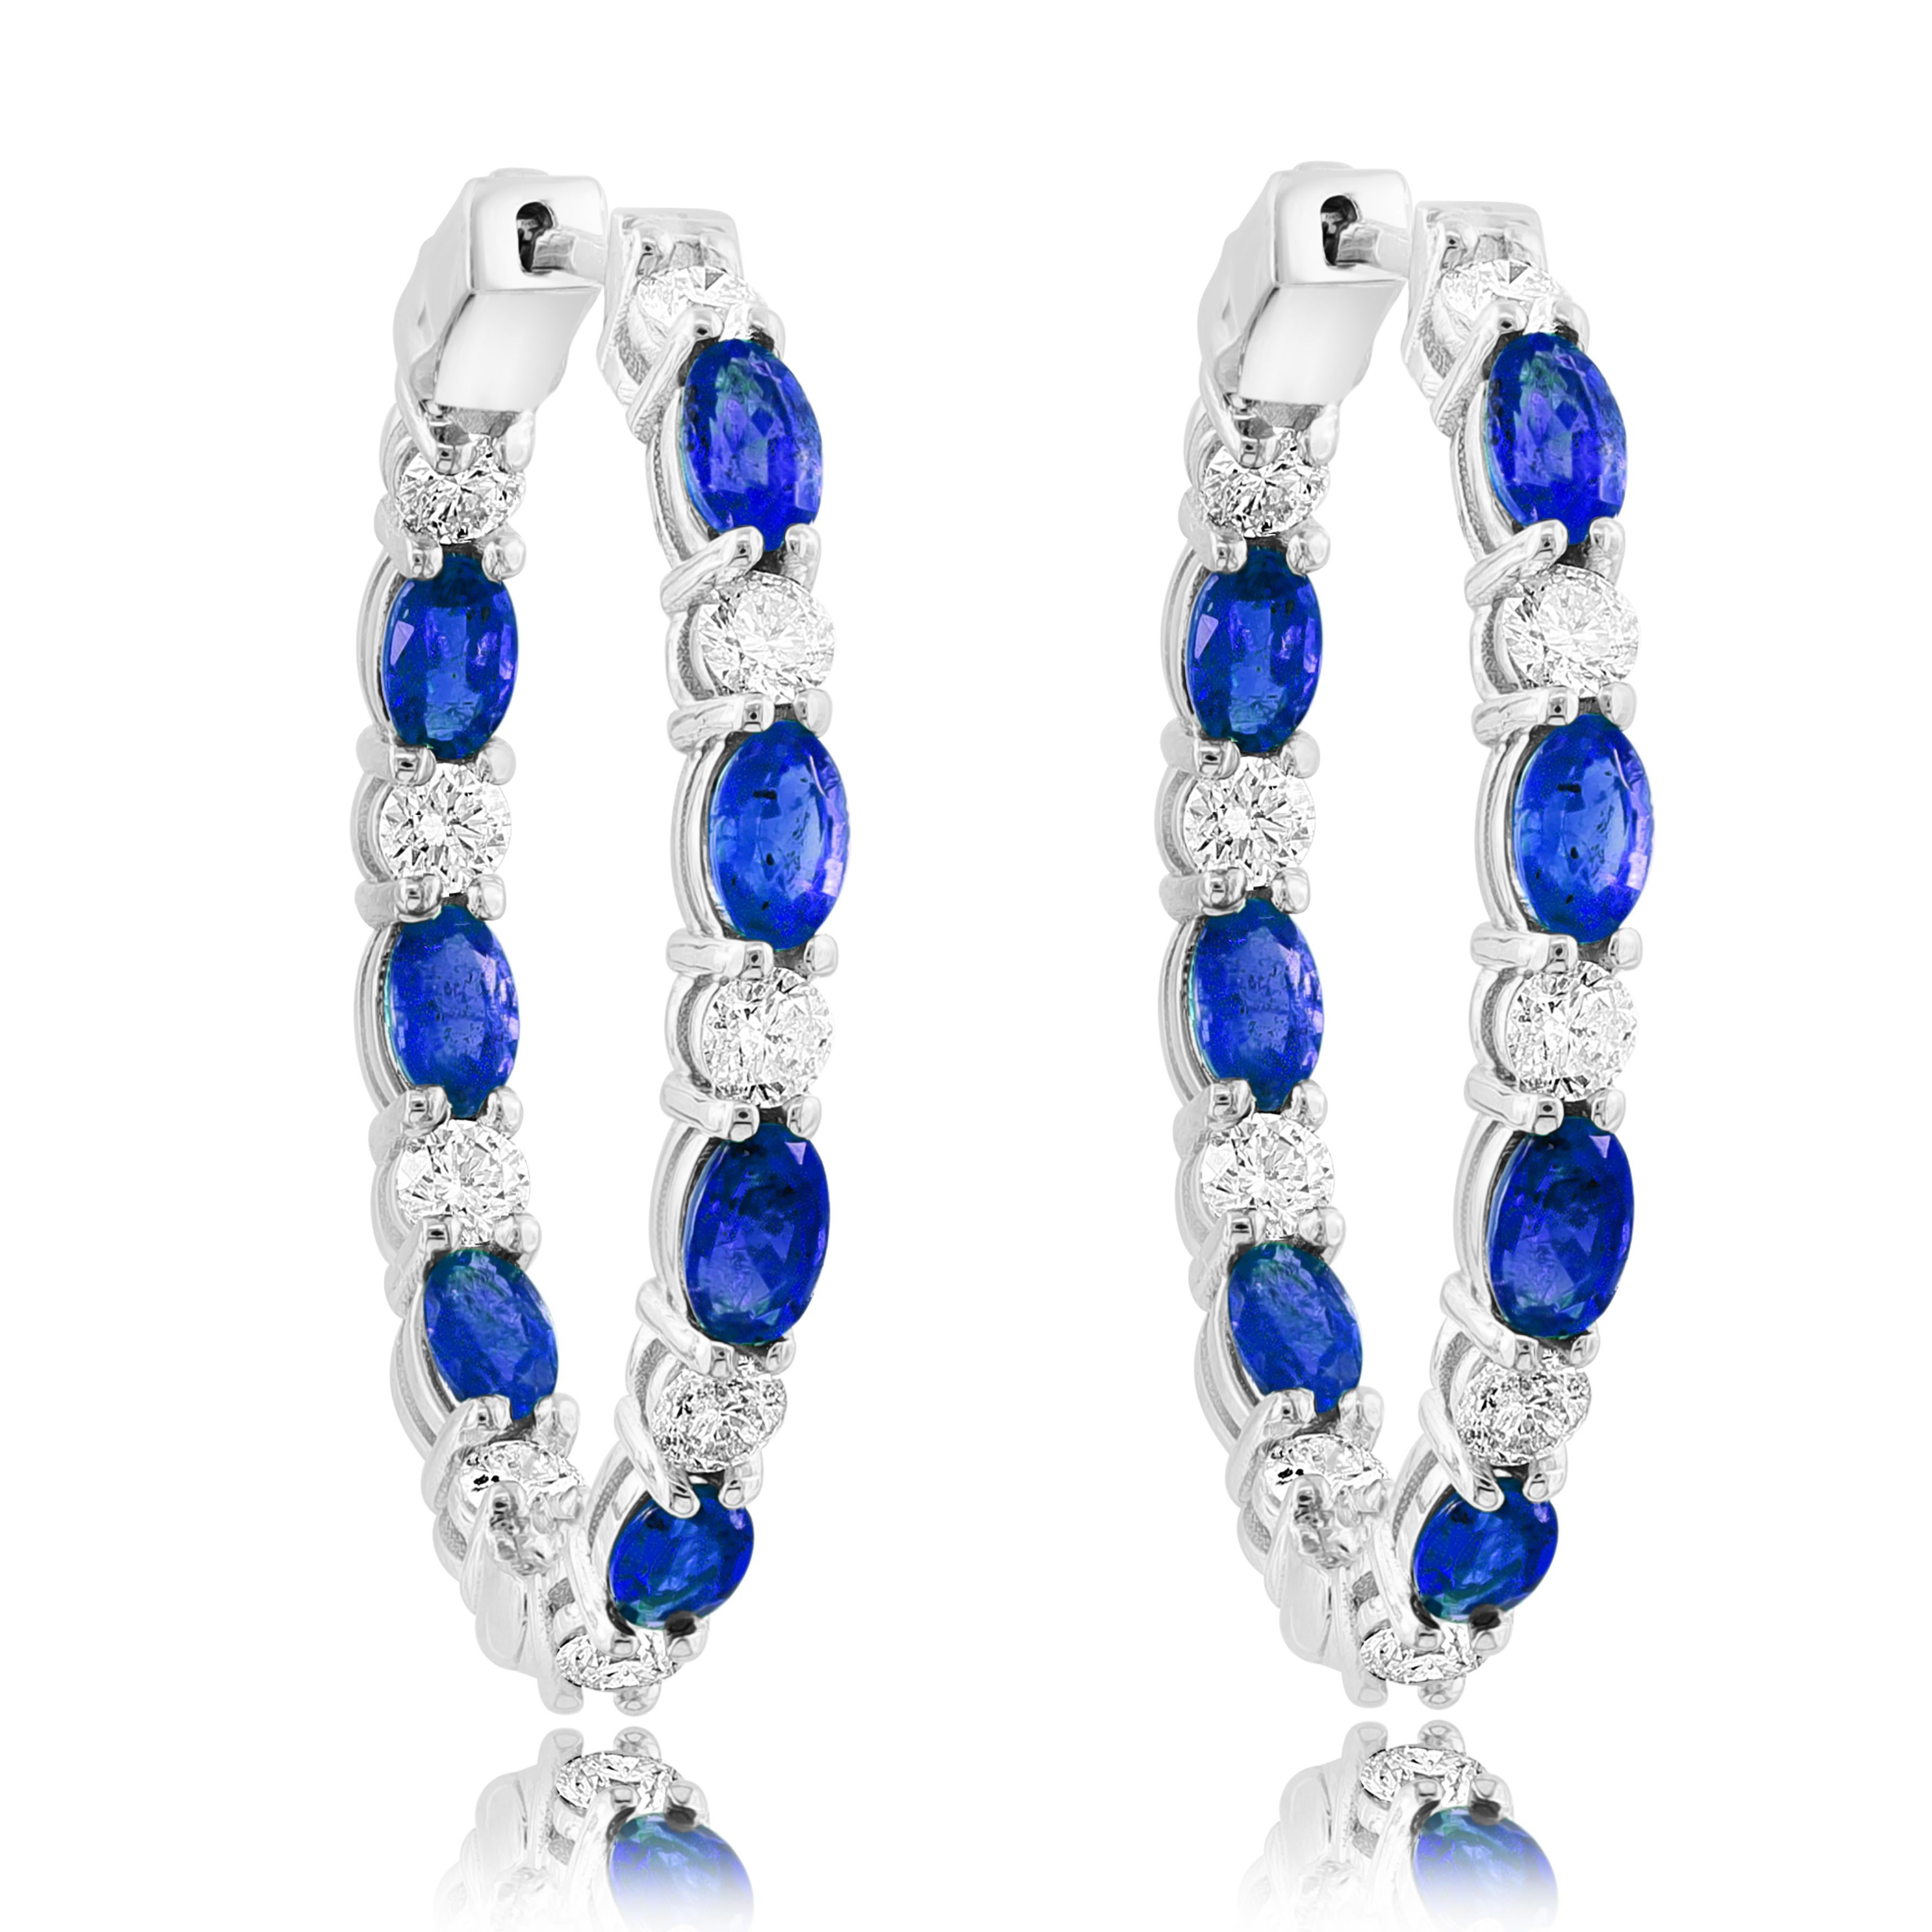 Contemporary 4.13 Carat Oval Cut Blue Sapphire Diamond Hoop Earrings in 14K White Gold For Sale